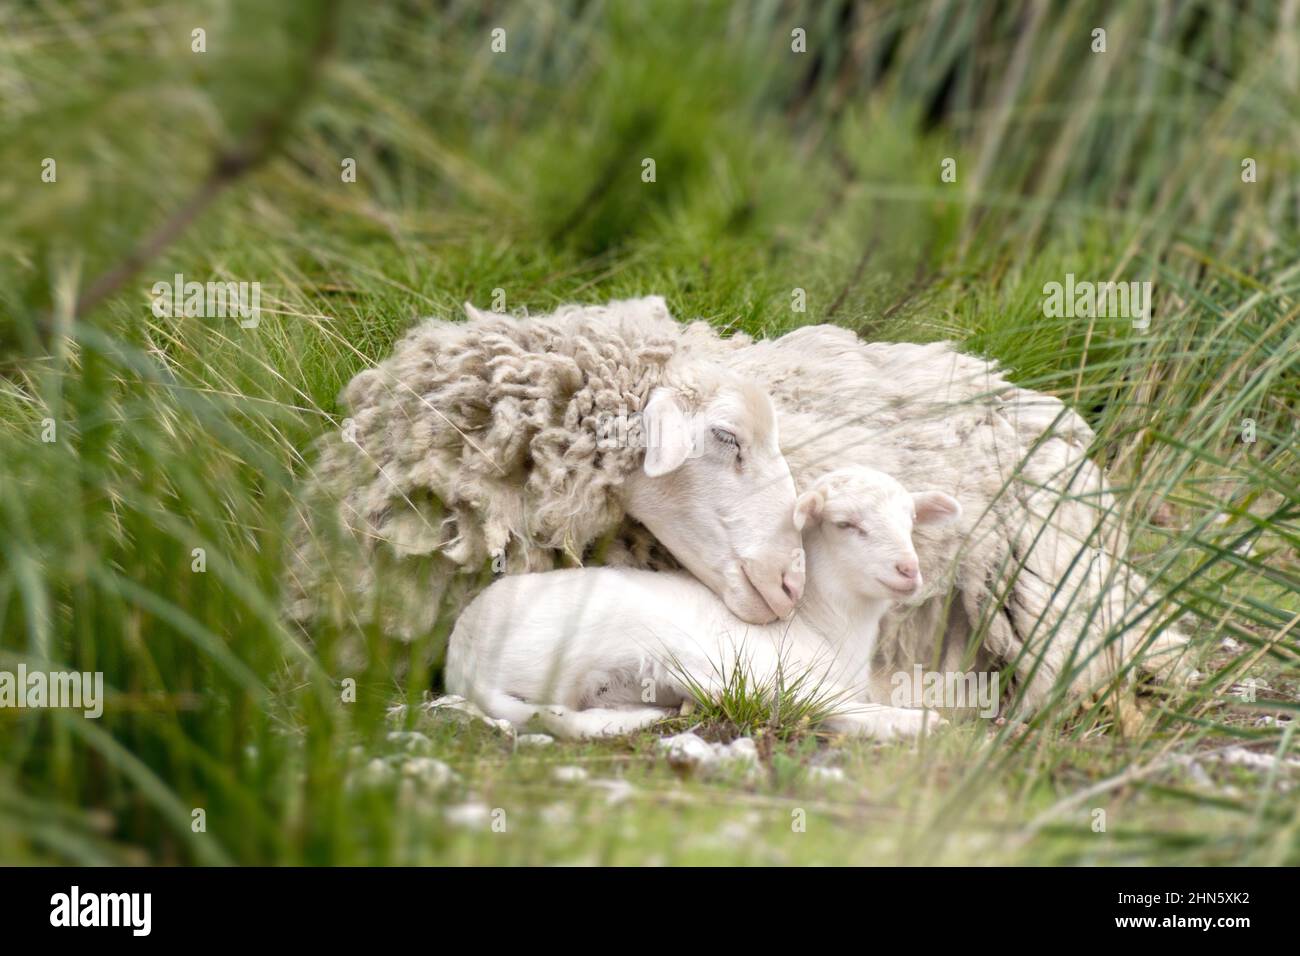 Sheep and baby lamb in the grass, symbol of mother love Stock Photo